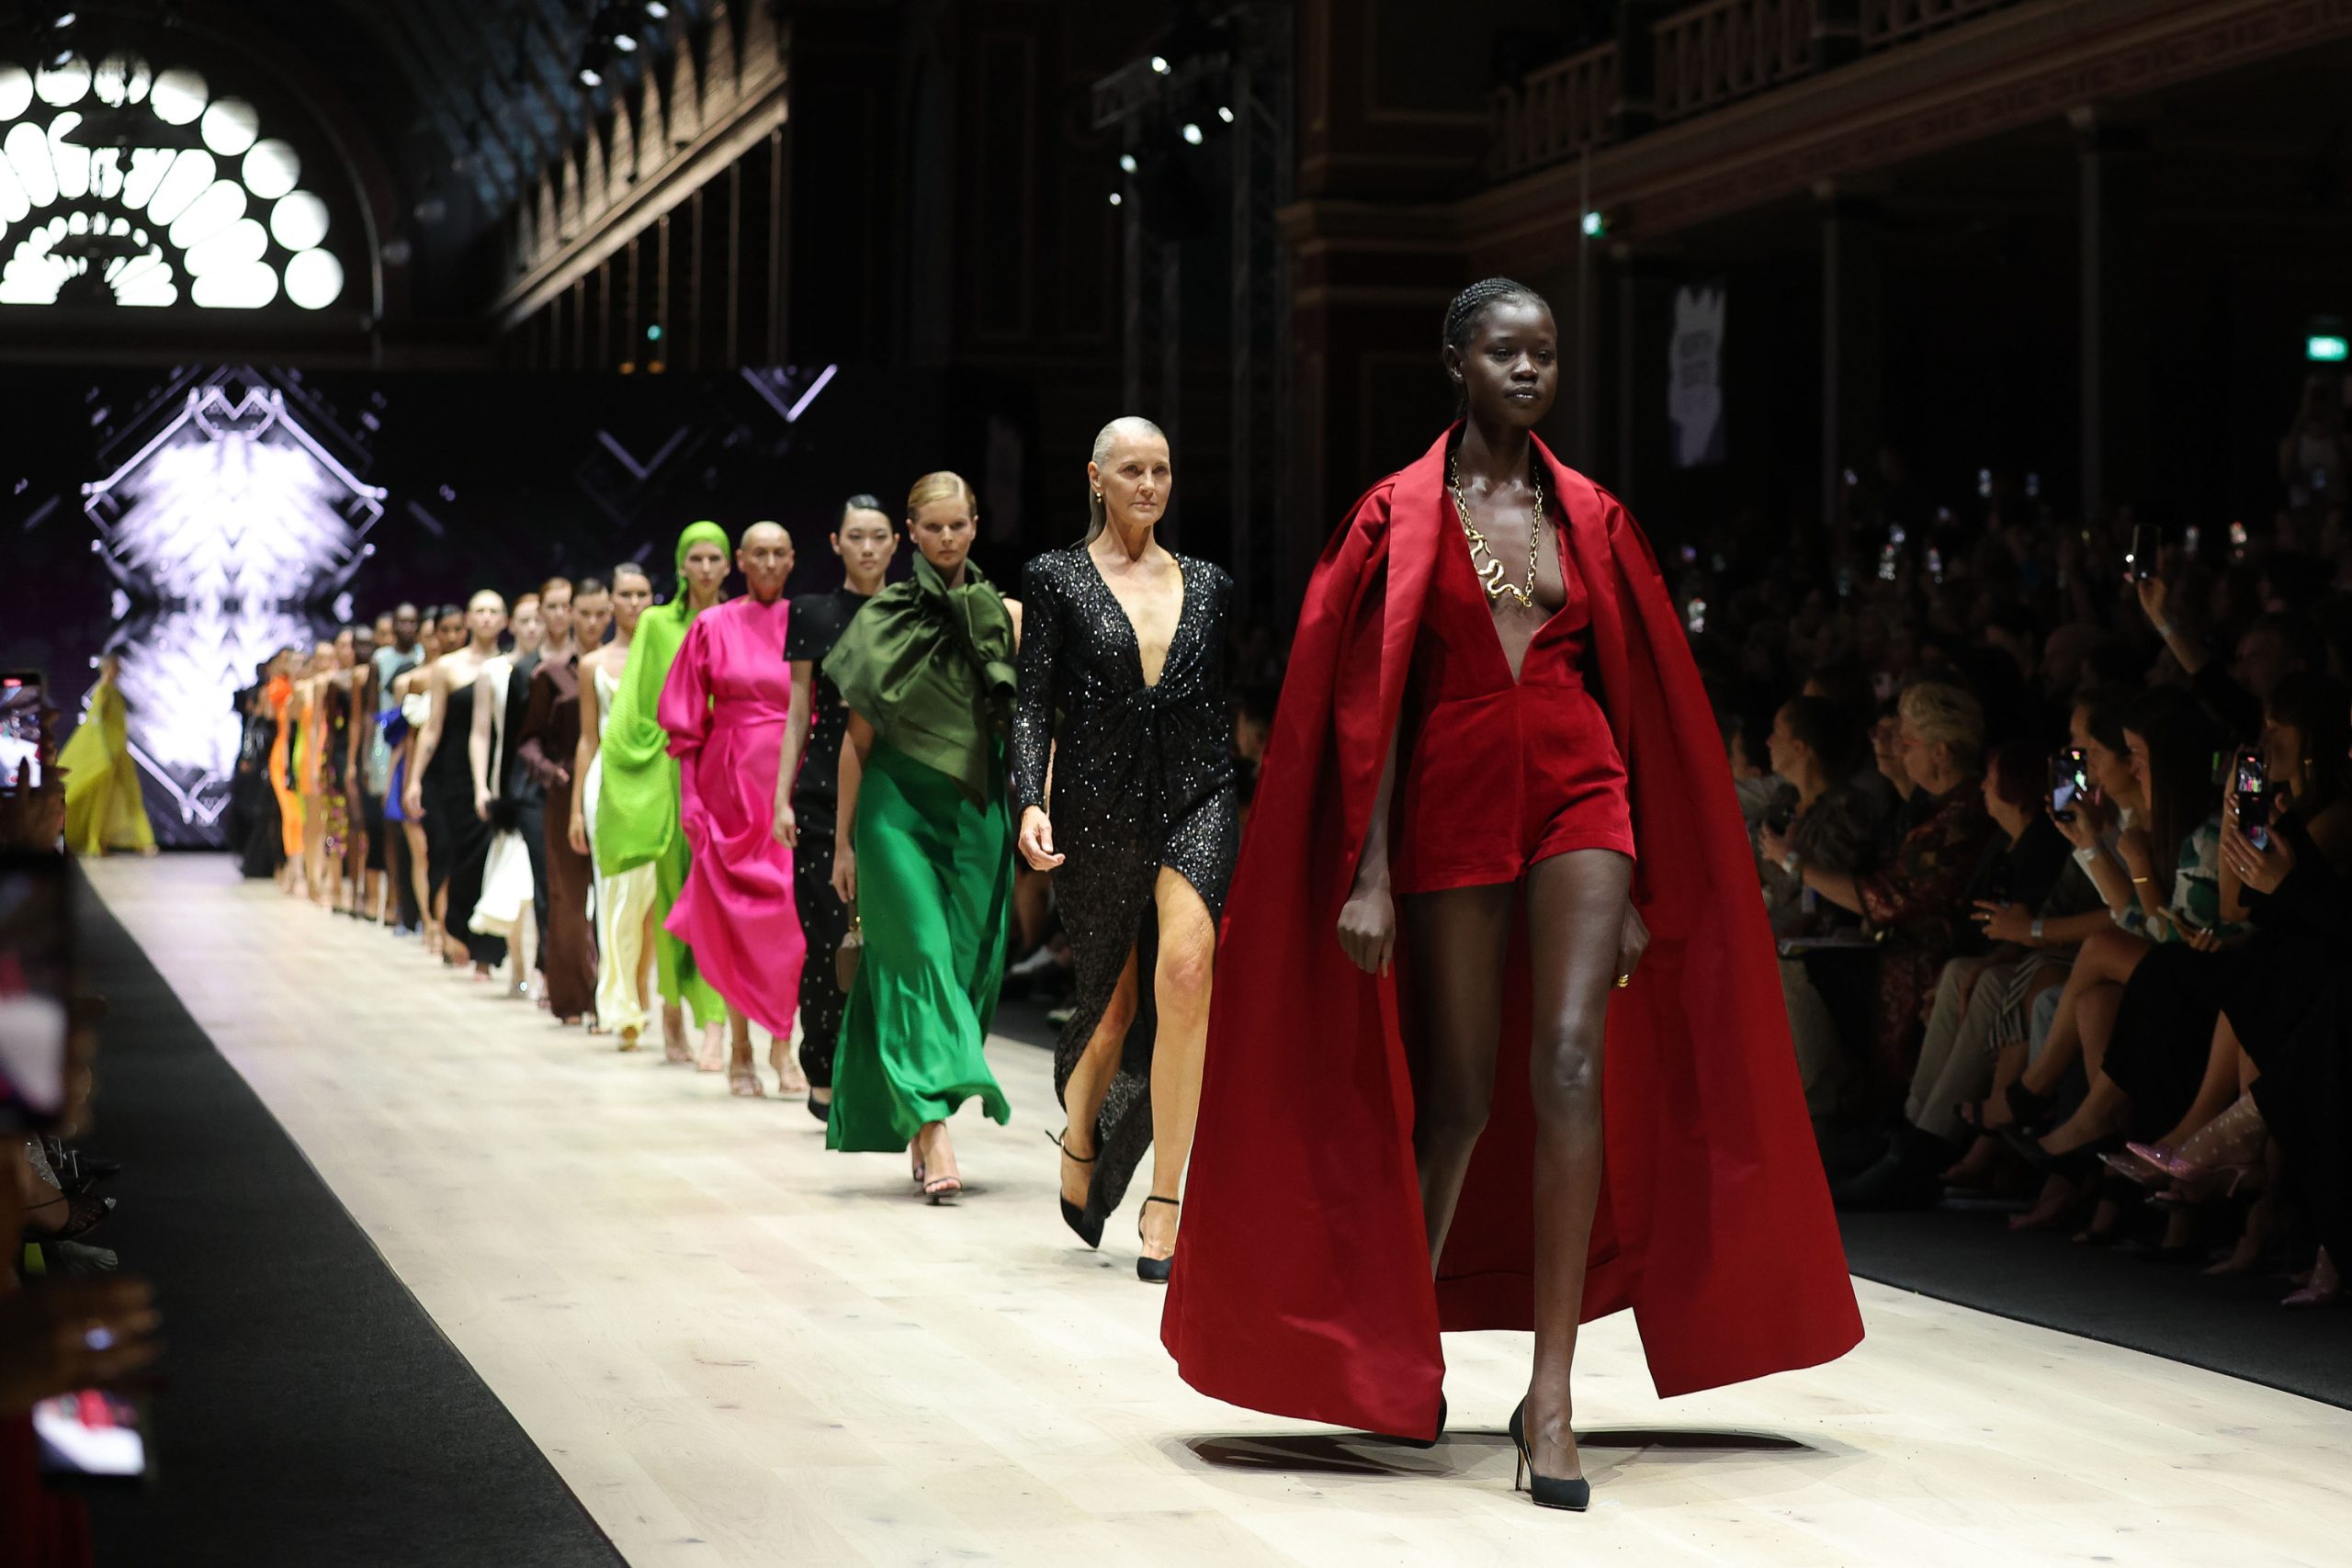 Melbourne Fashion Festival will take over the city with unique runways and events